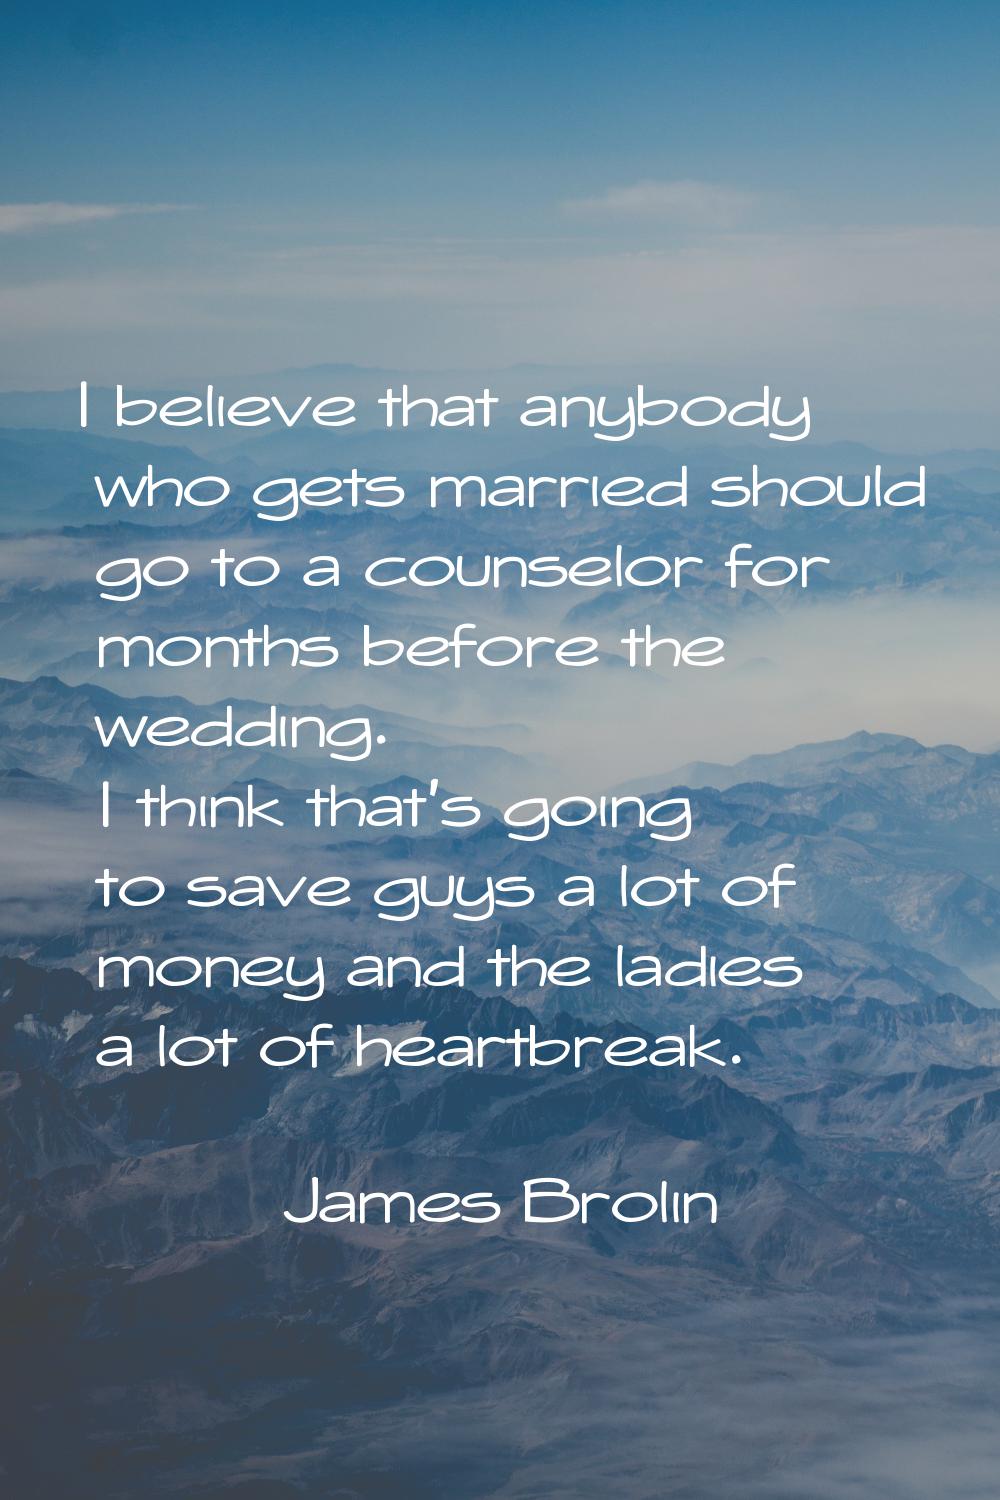 I believe that anybody who gets married should go to a counselor for months before the wedding. I t